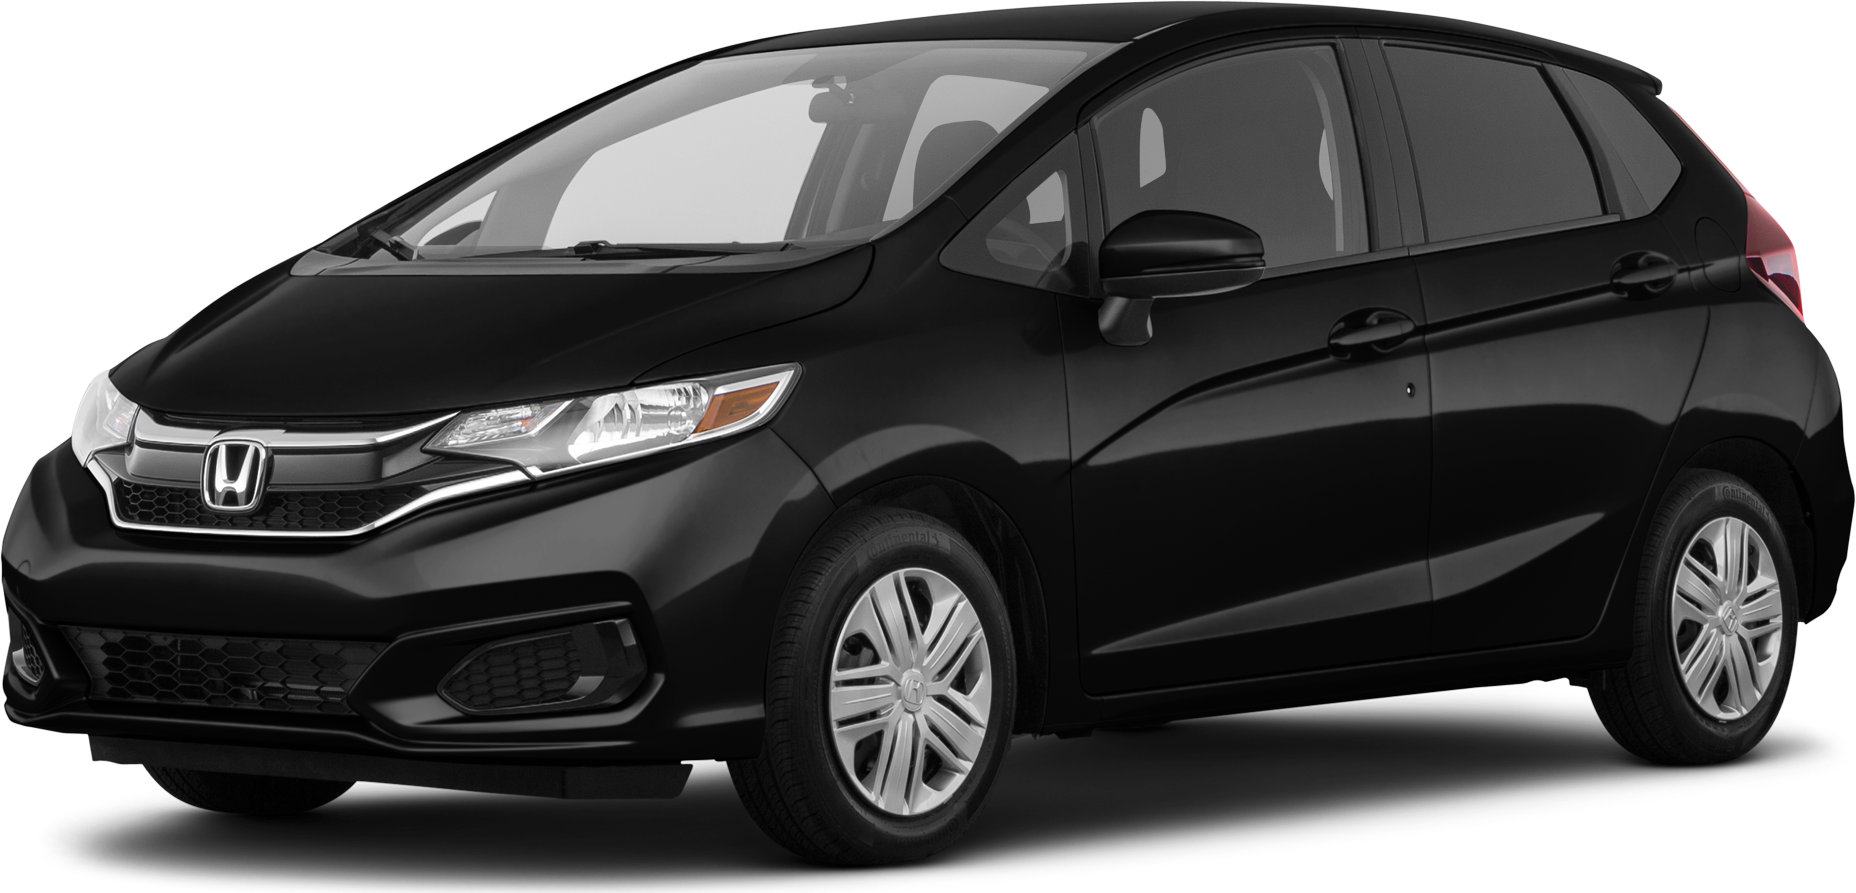 19 Honda Fit Values Cars For Sale Kelley Blue Book